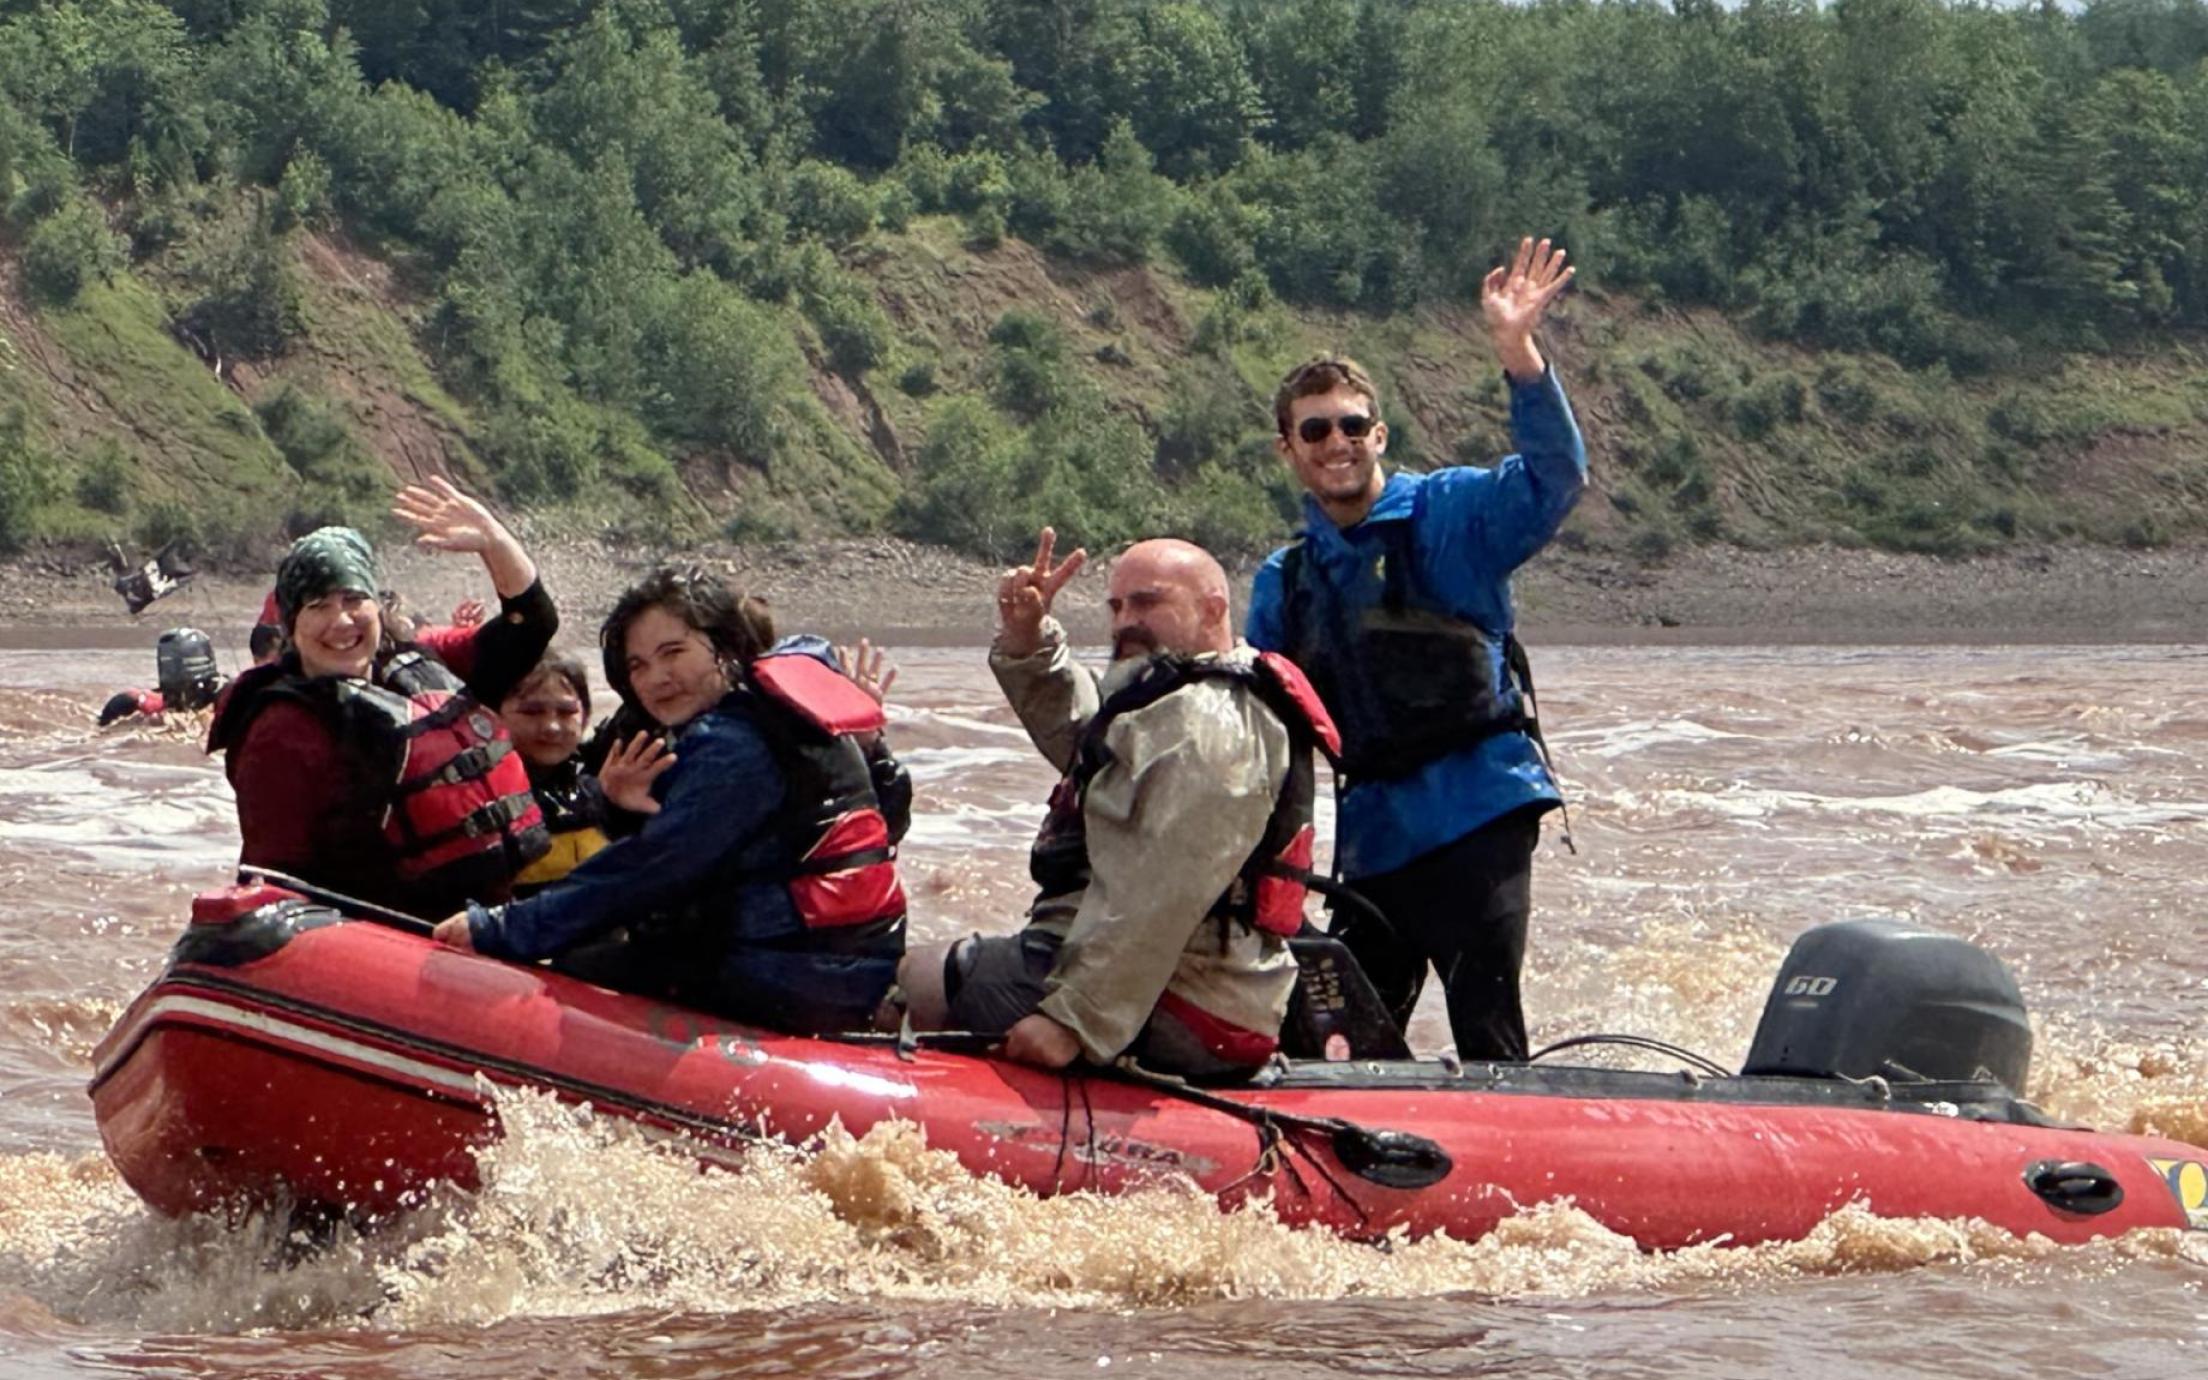 Lucas Gamp in a raft on a river with clients waving at the camera